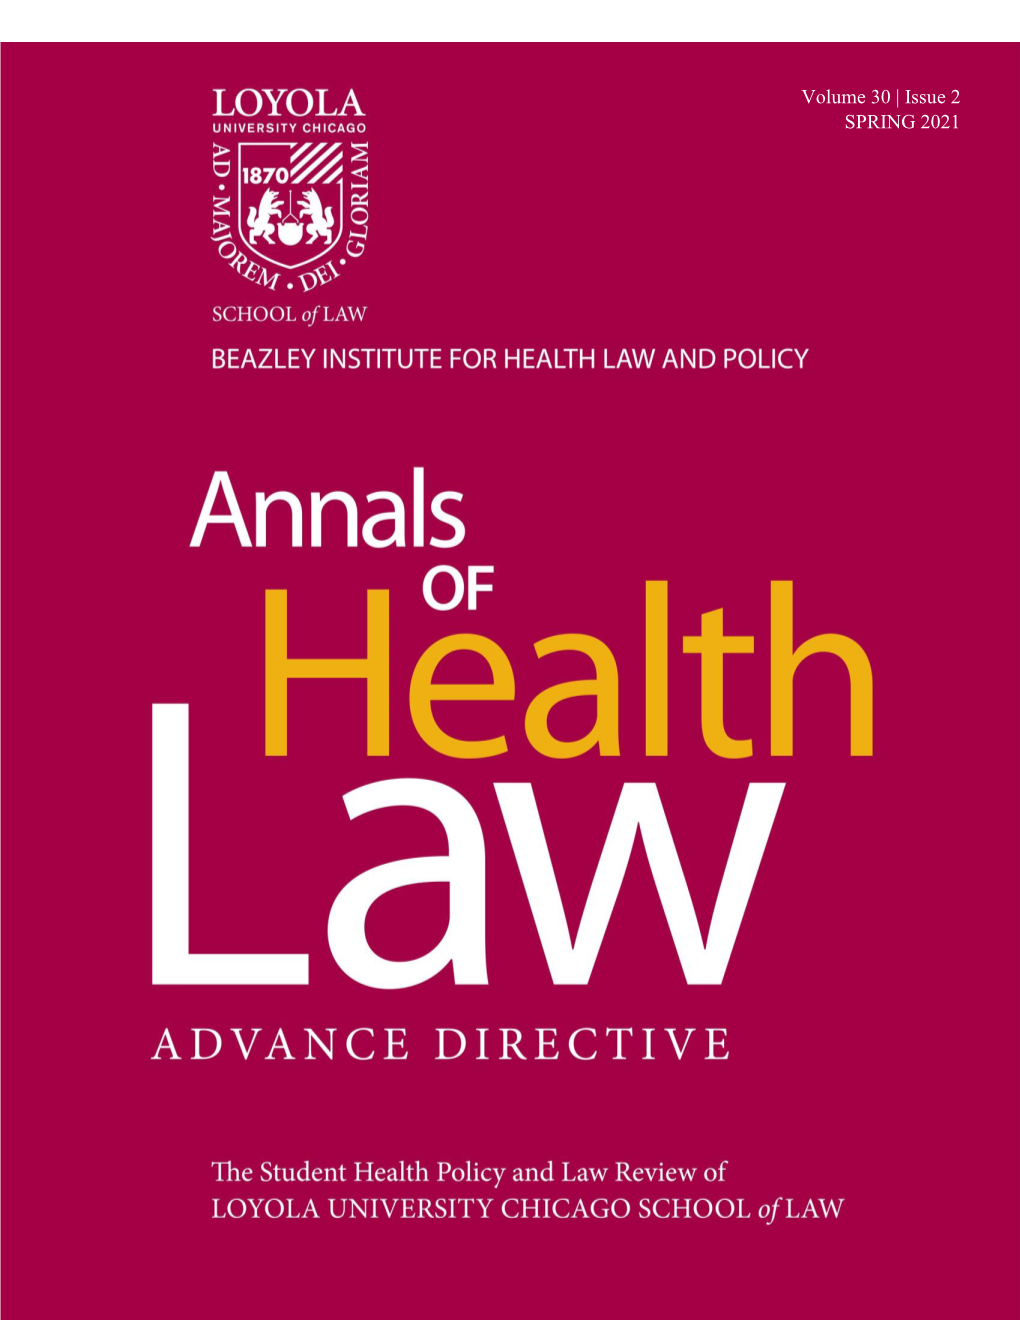 Issue 2 SPRING 2021 ANNALS of HEALTH LAW Advance Directive